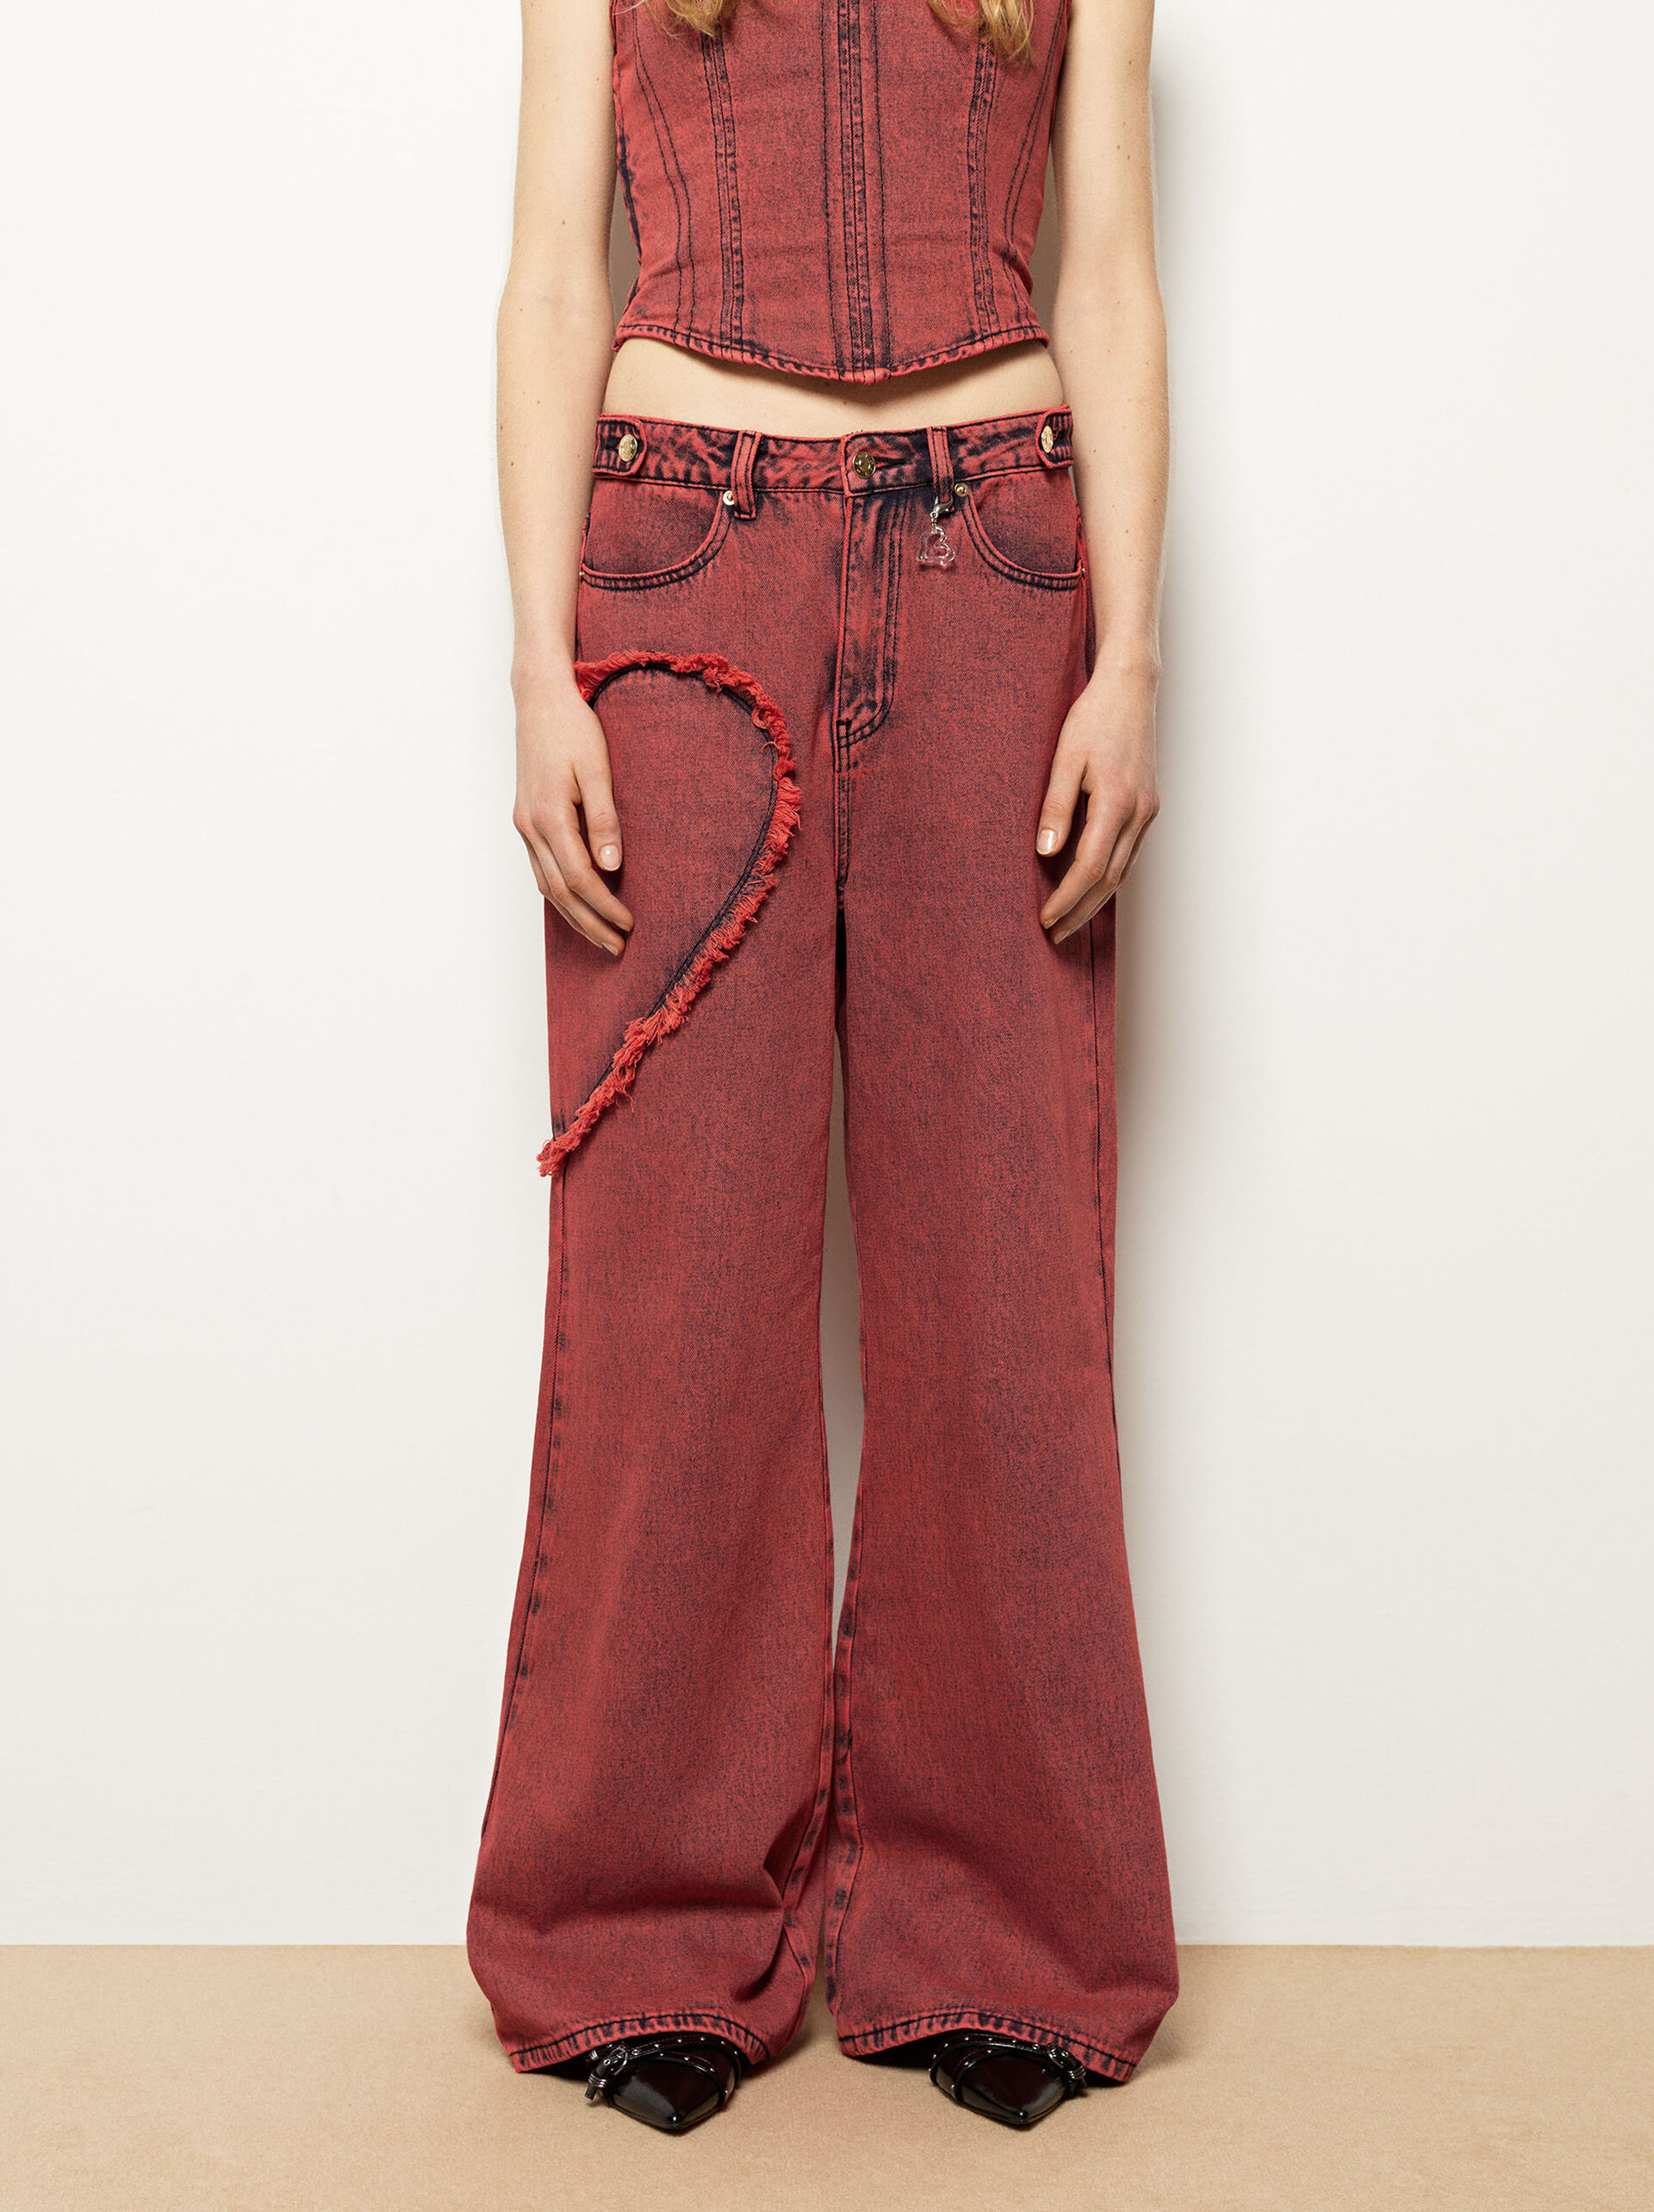 Online Exclusive - Heart Jeans image number 4.0